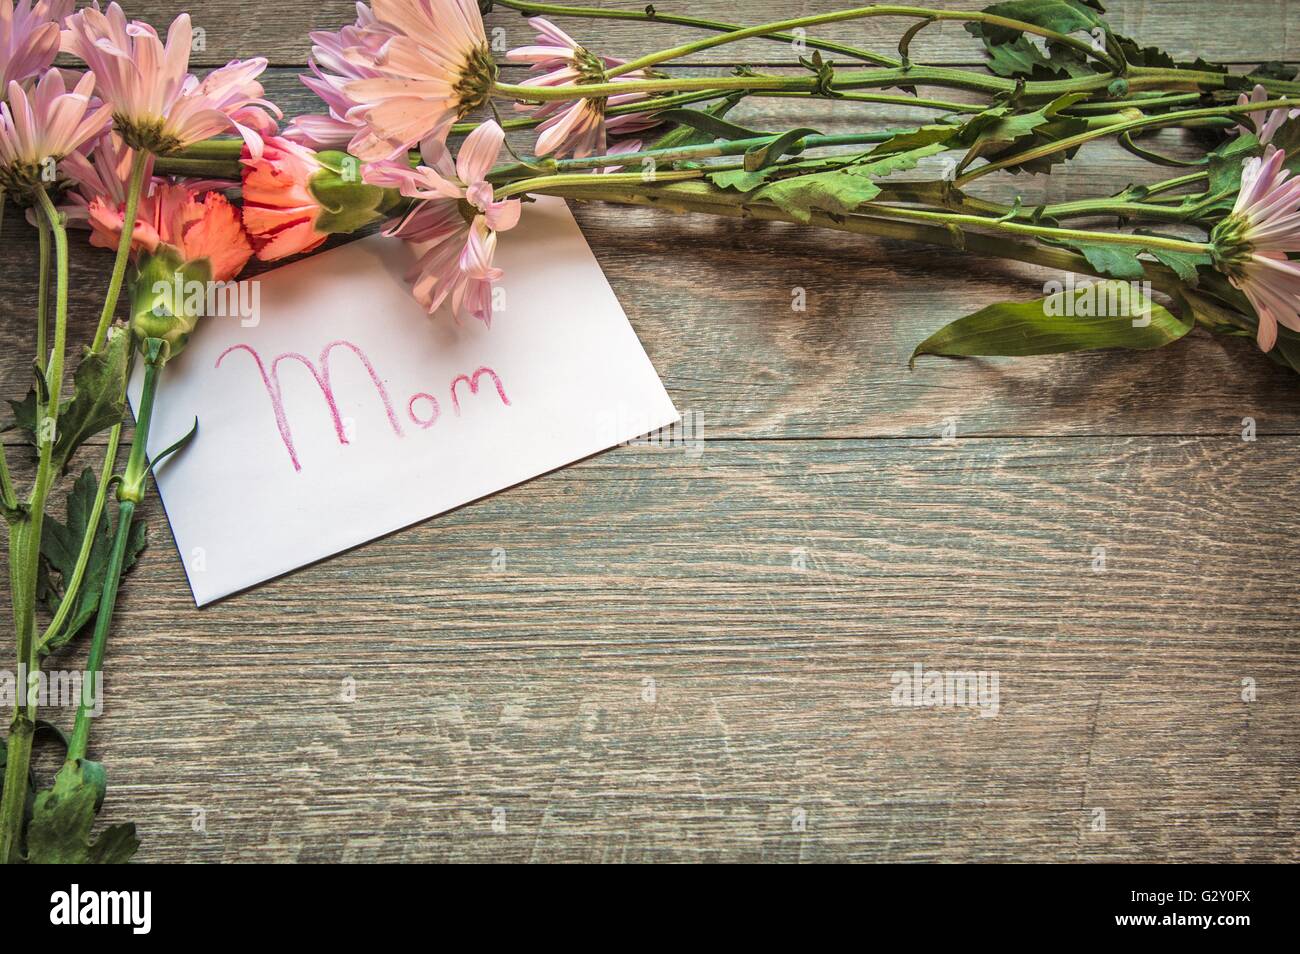 Gift For Mom. Flowers frame a handwritten card for Mom. Shot from above with rustic background and copy space. Stock Photo